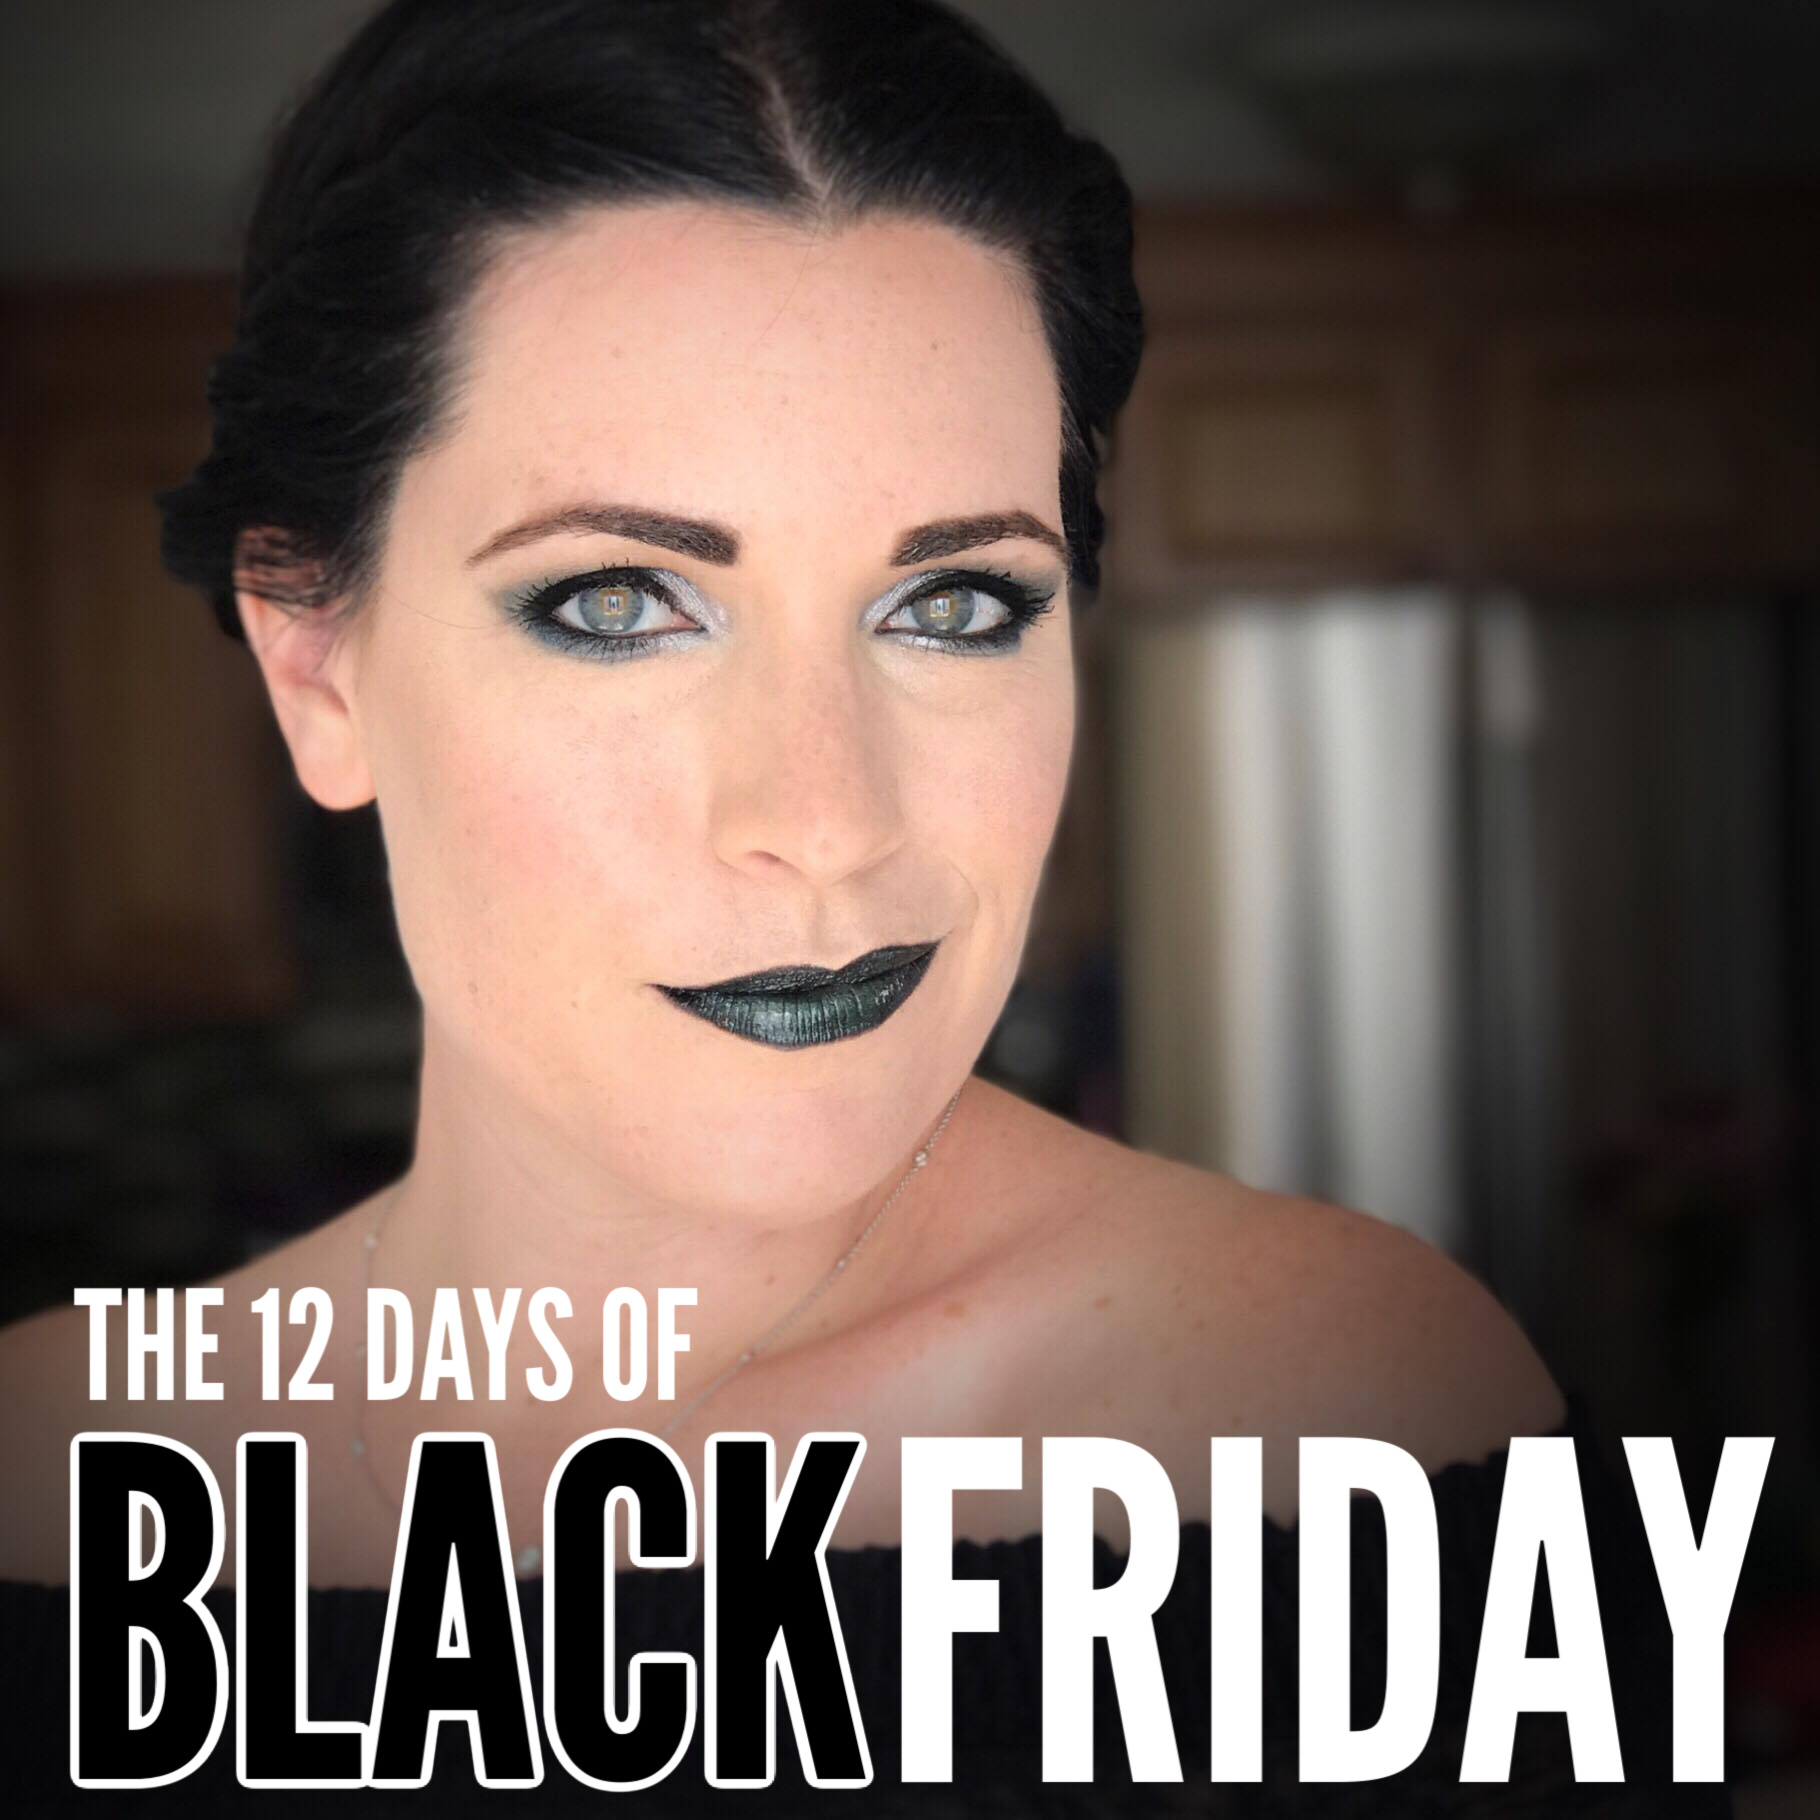 Younique Black Friday Deals -- 12 Days Of black Friday